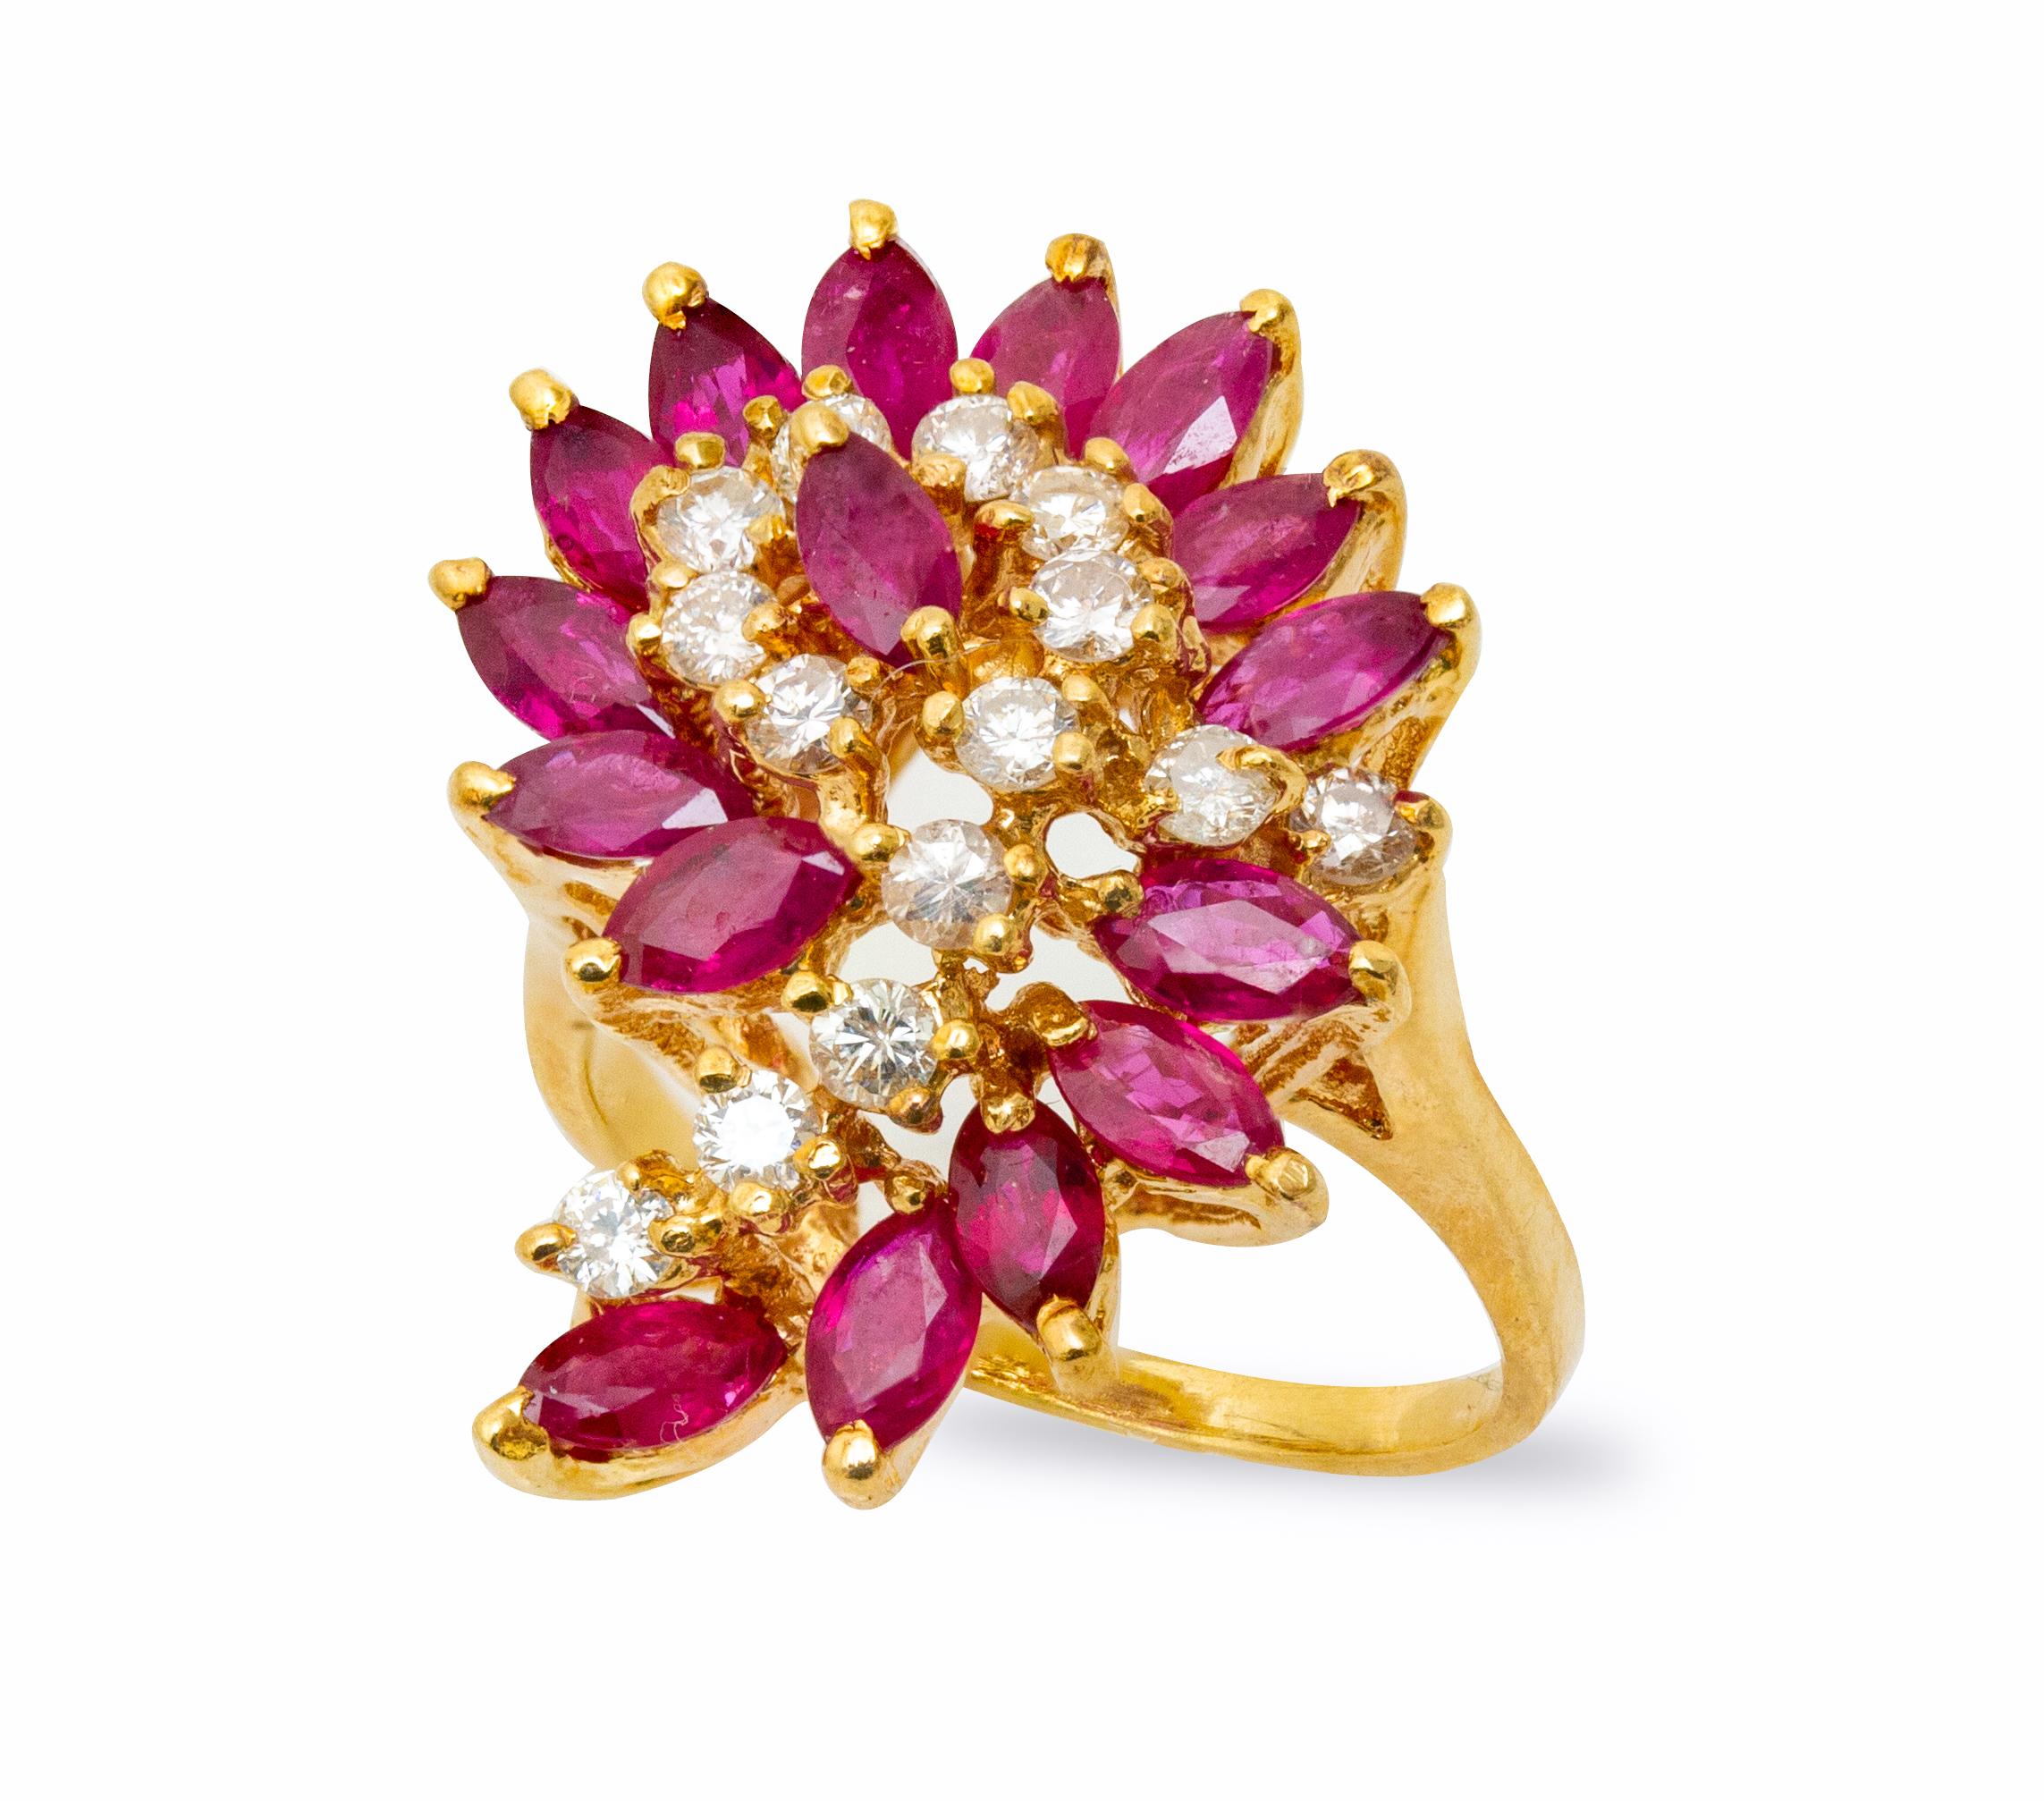 14K gold ruby and diamond ring size 5.75. The ring measure 1